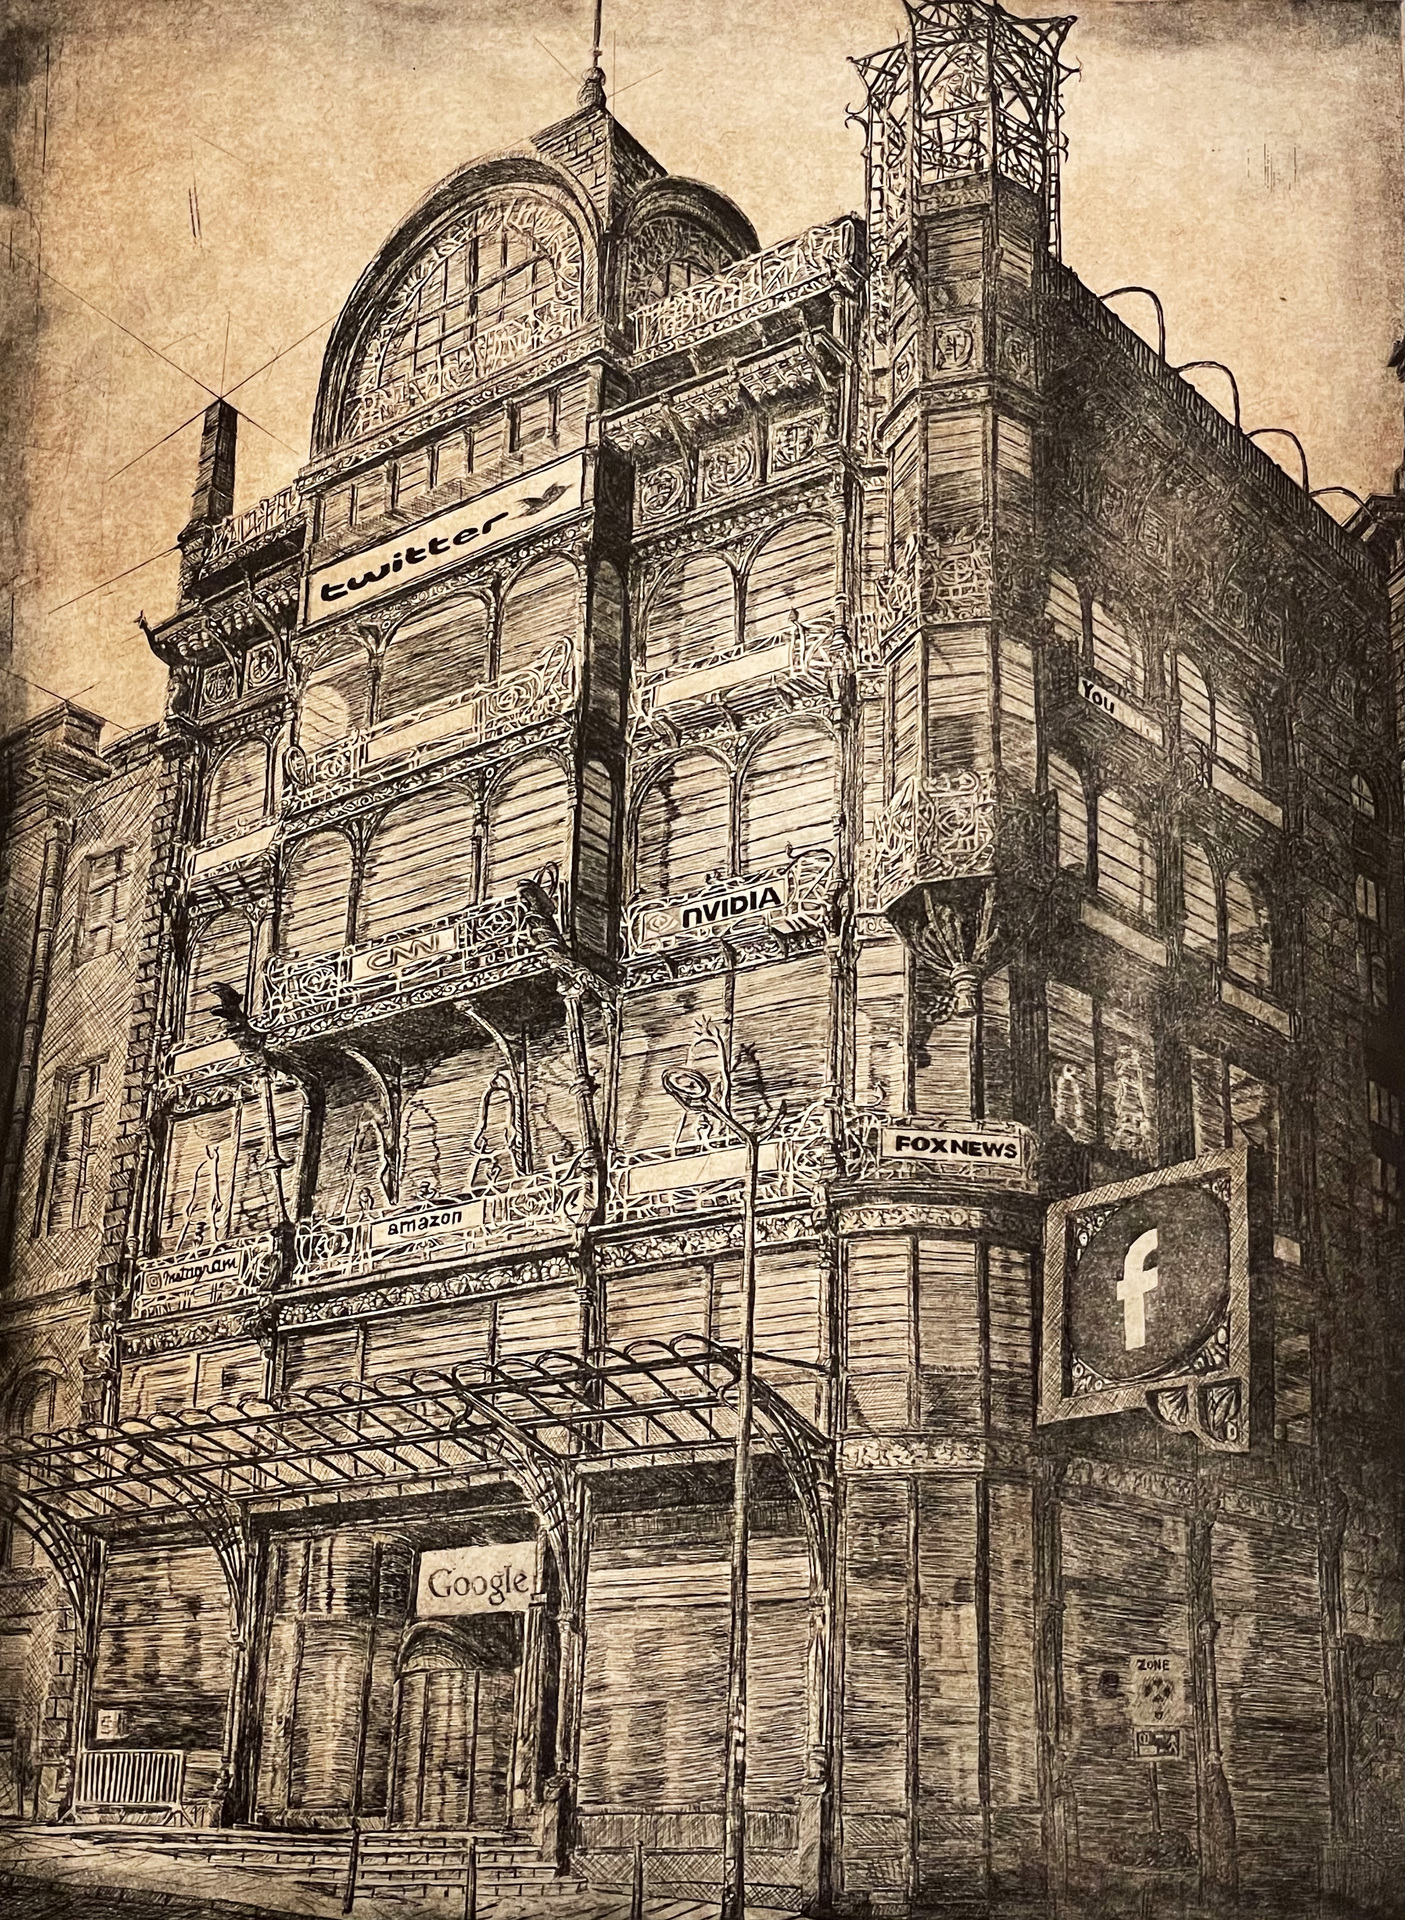 Andrew Lawson etching in sepia tone of a musical instrument museum in Brussels with added signage depicting social media companies and the discussion about their use to spread disinformation 